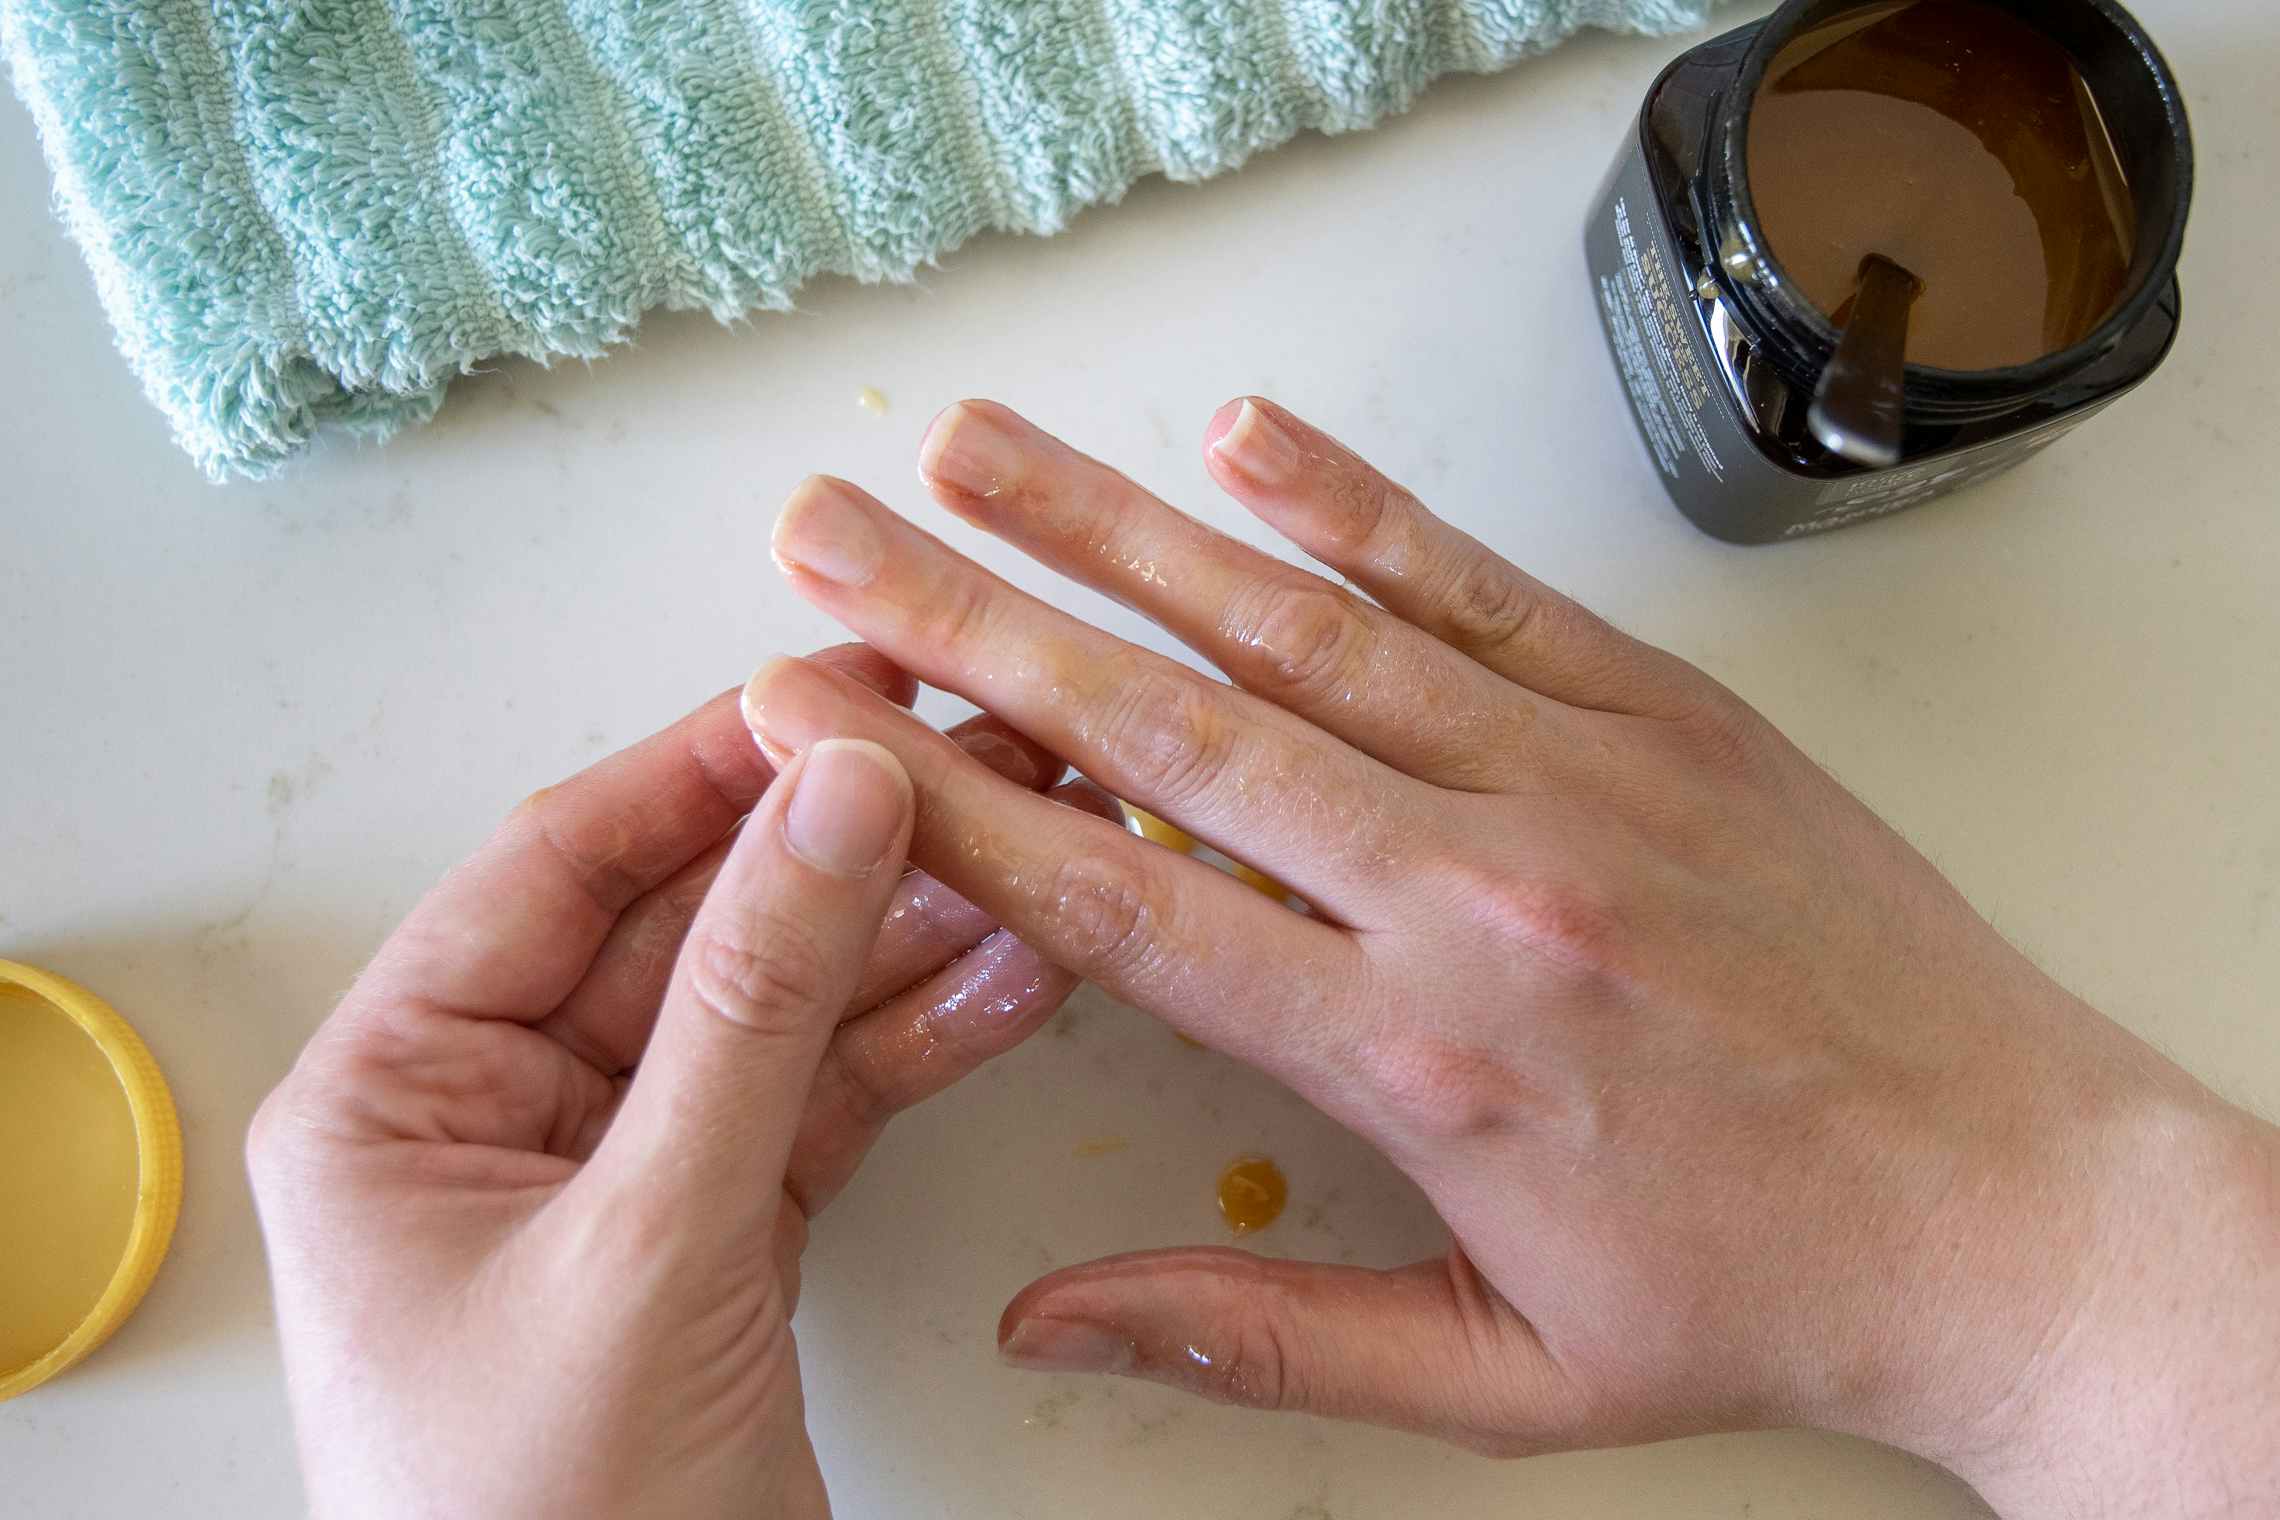 A woman massaging Manuka honey into her finger nails and cuticles.